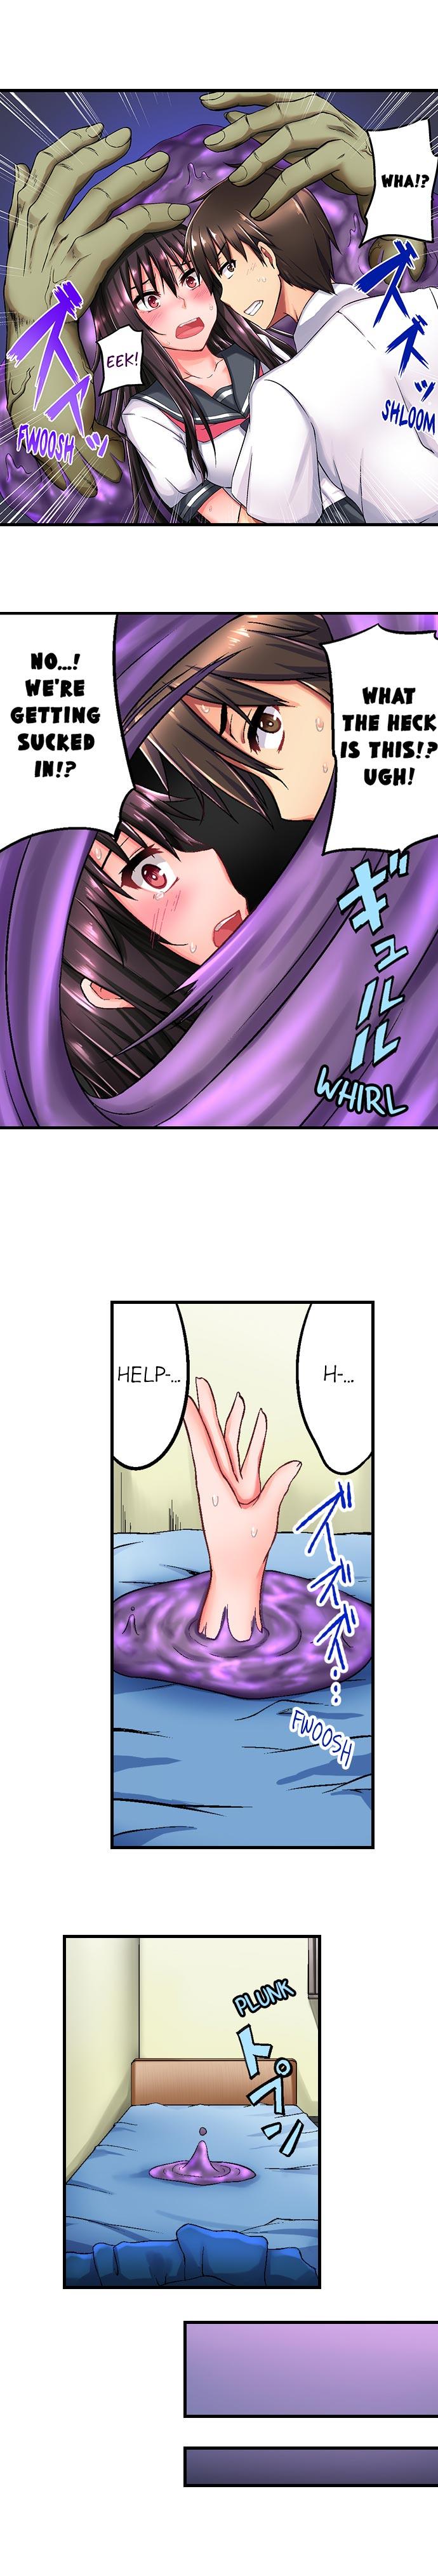 Cutie Sex Lessons In The Demon World Heels - Page 8